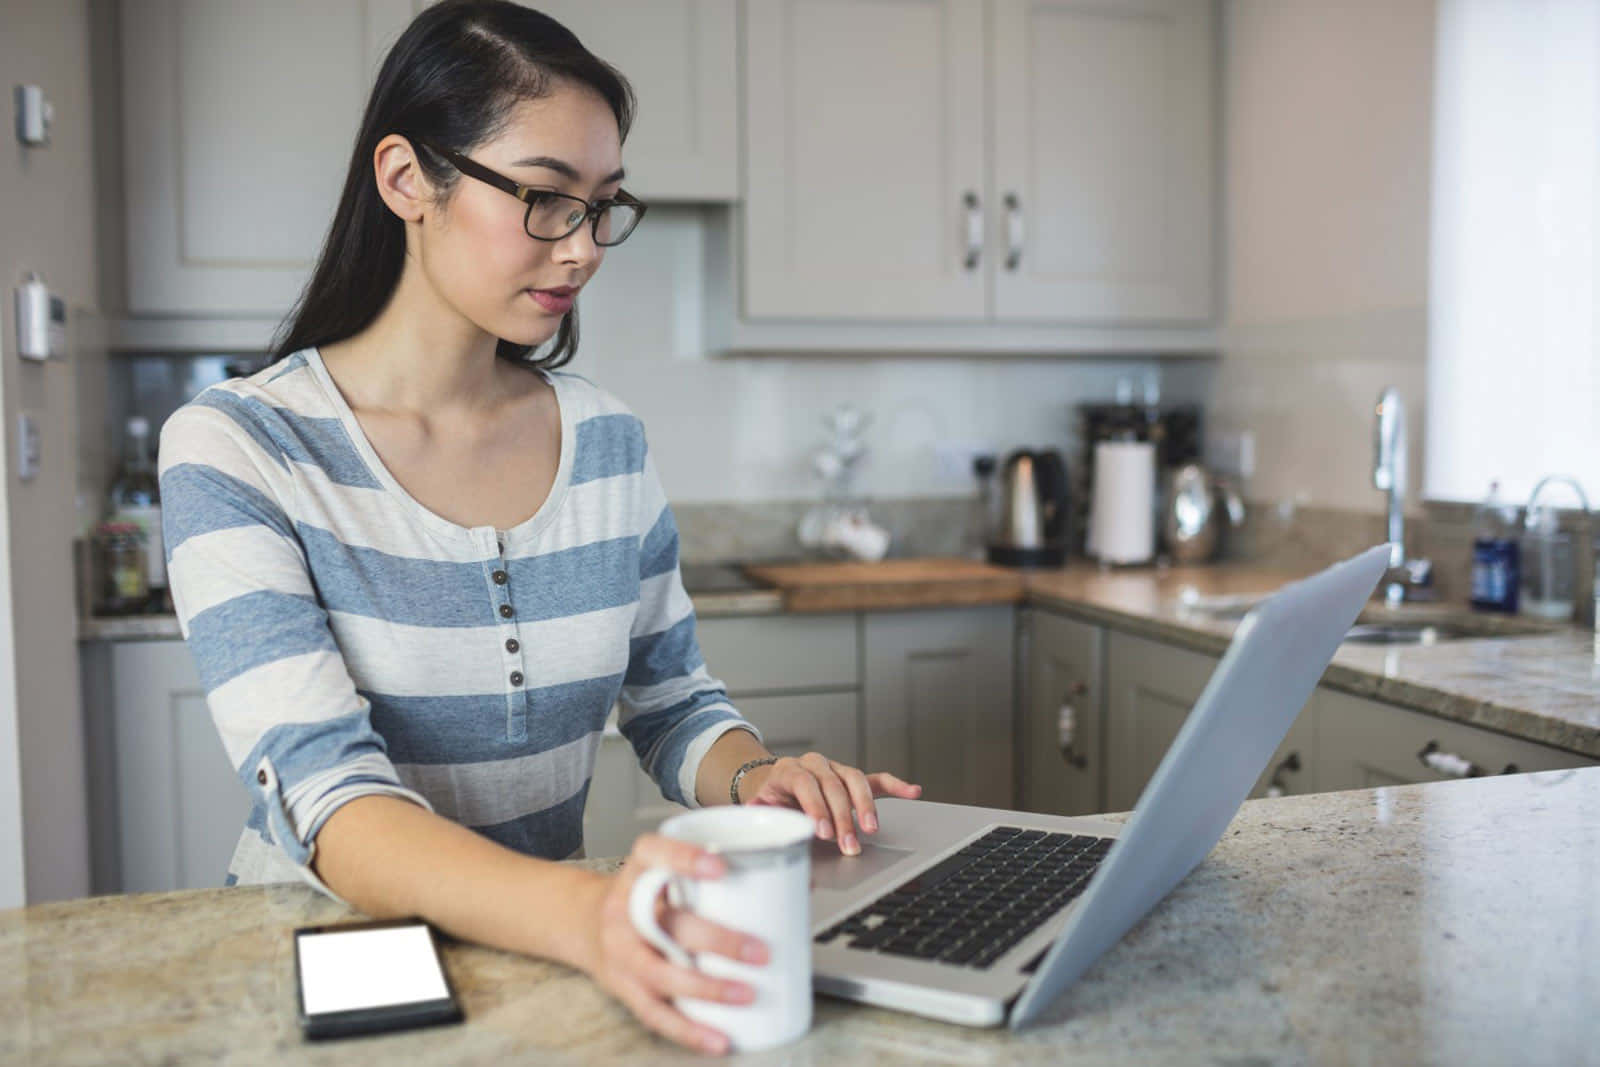 Woman Working On Laptop In Kitchen